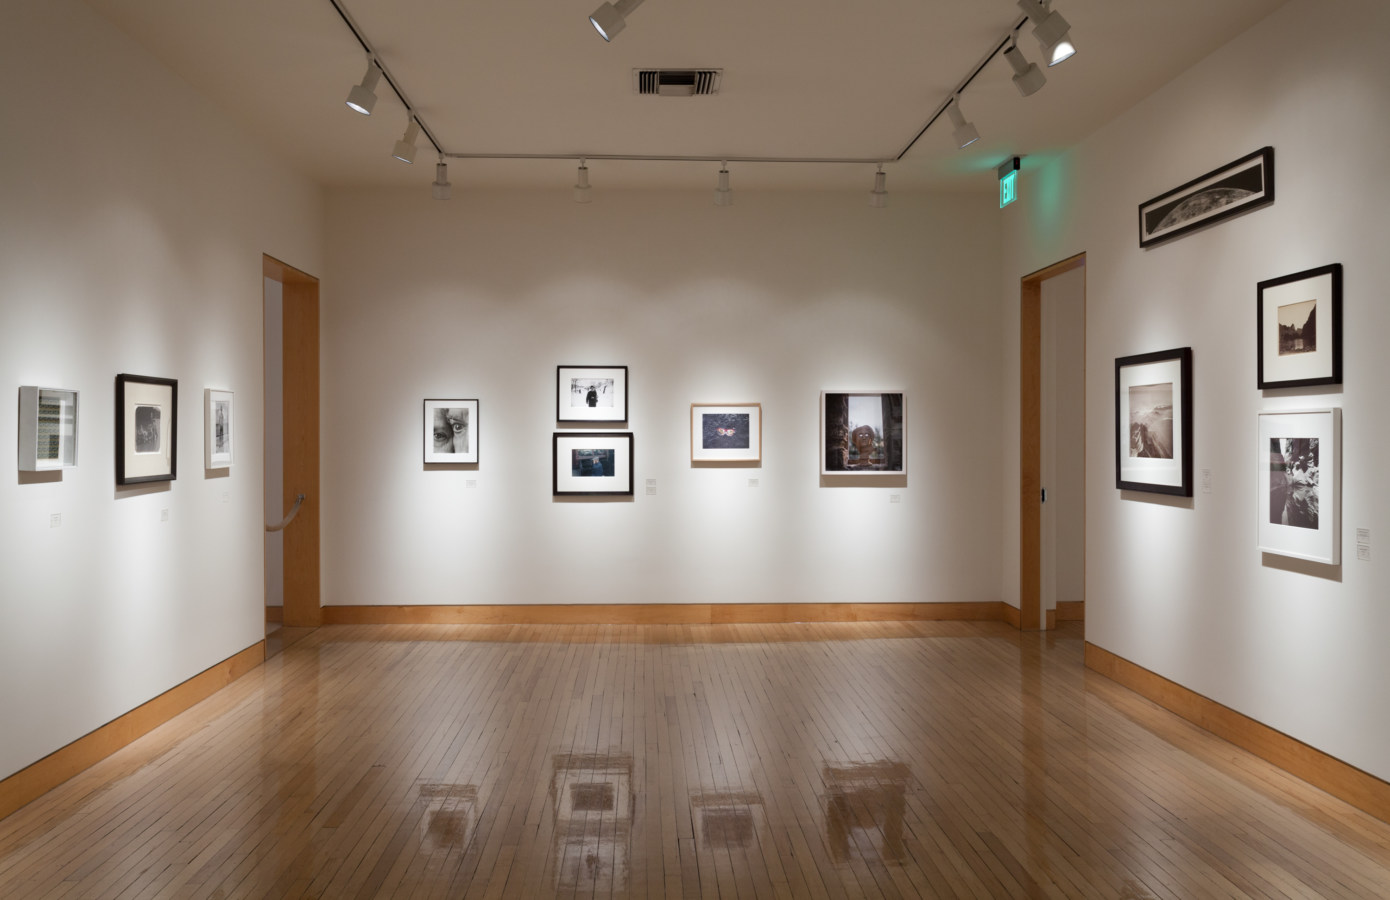 Color image of framed photographs on white gallery walls